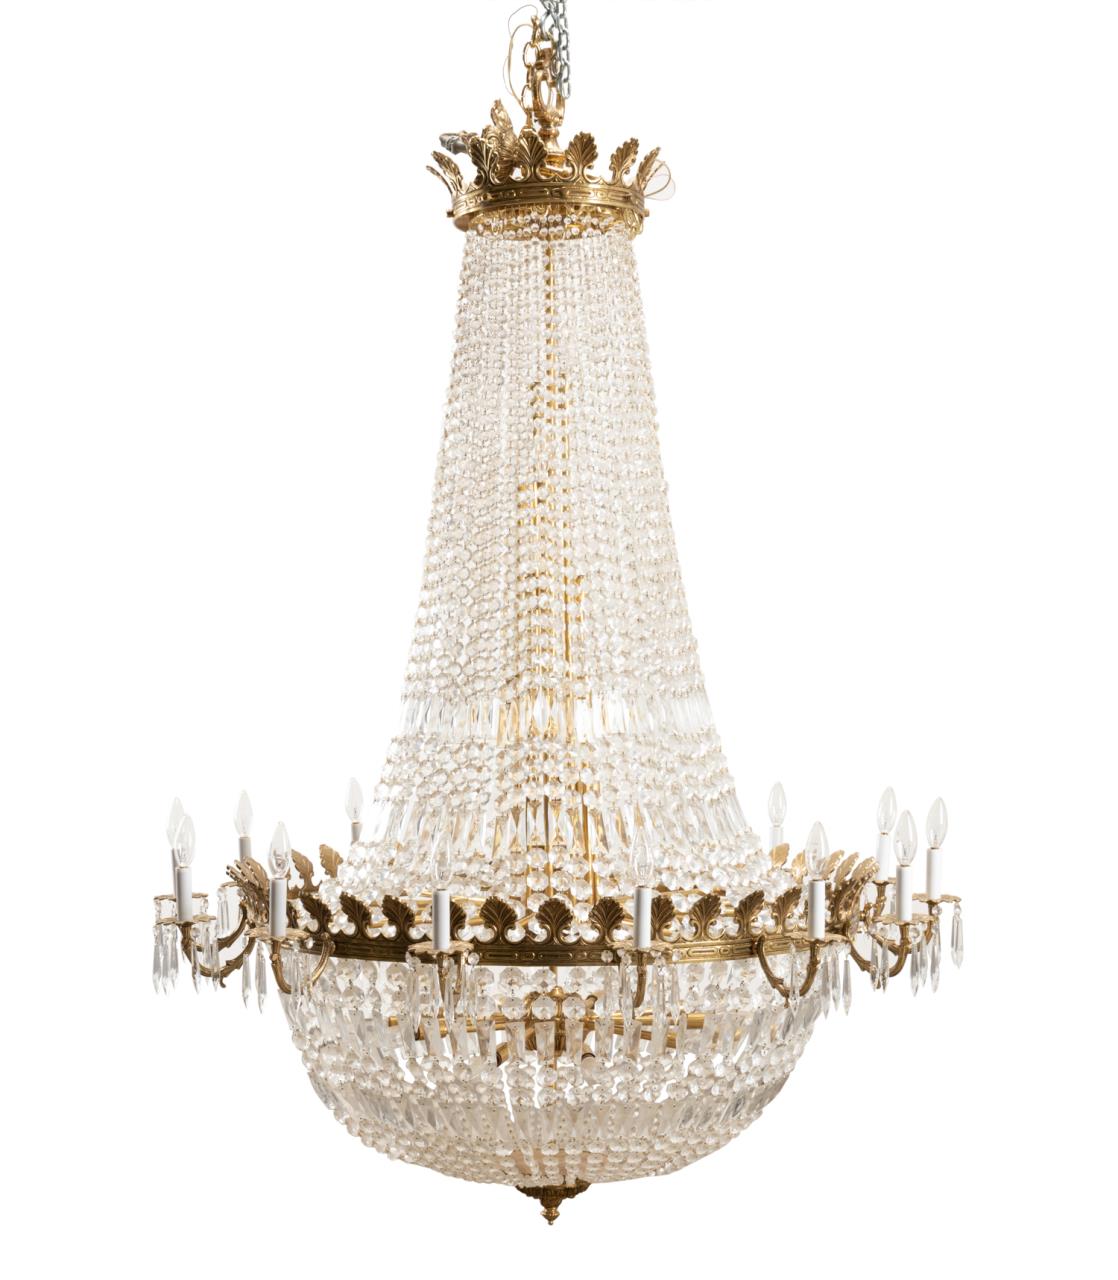 LARGE EMPIRE STYLE CRYSTAL BASKET 2fa4d8